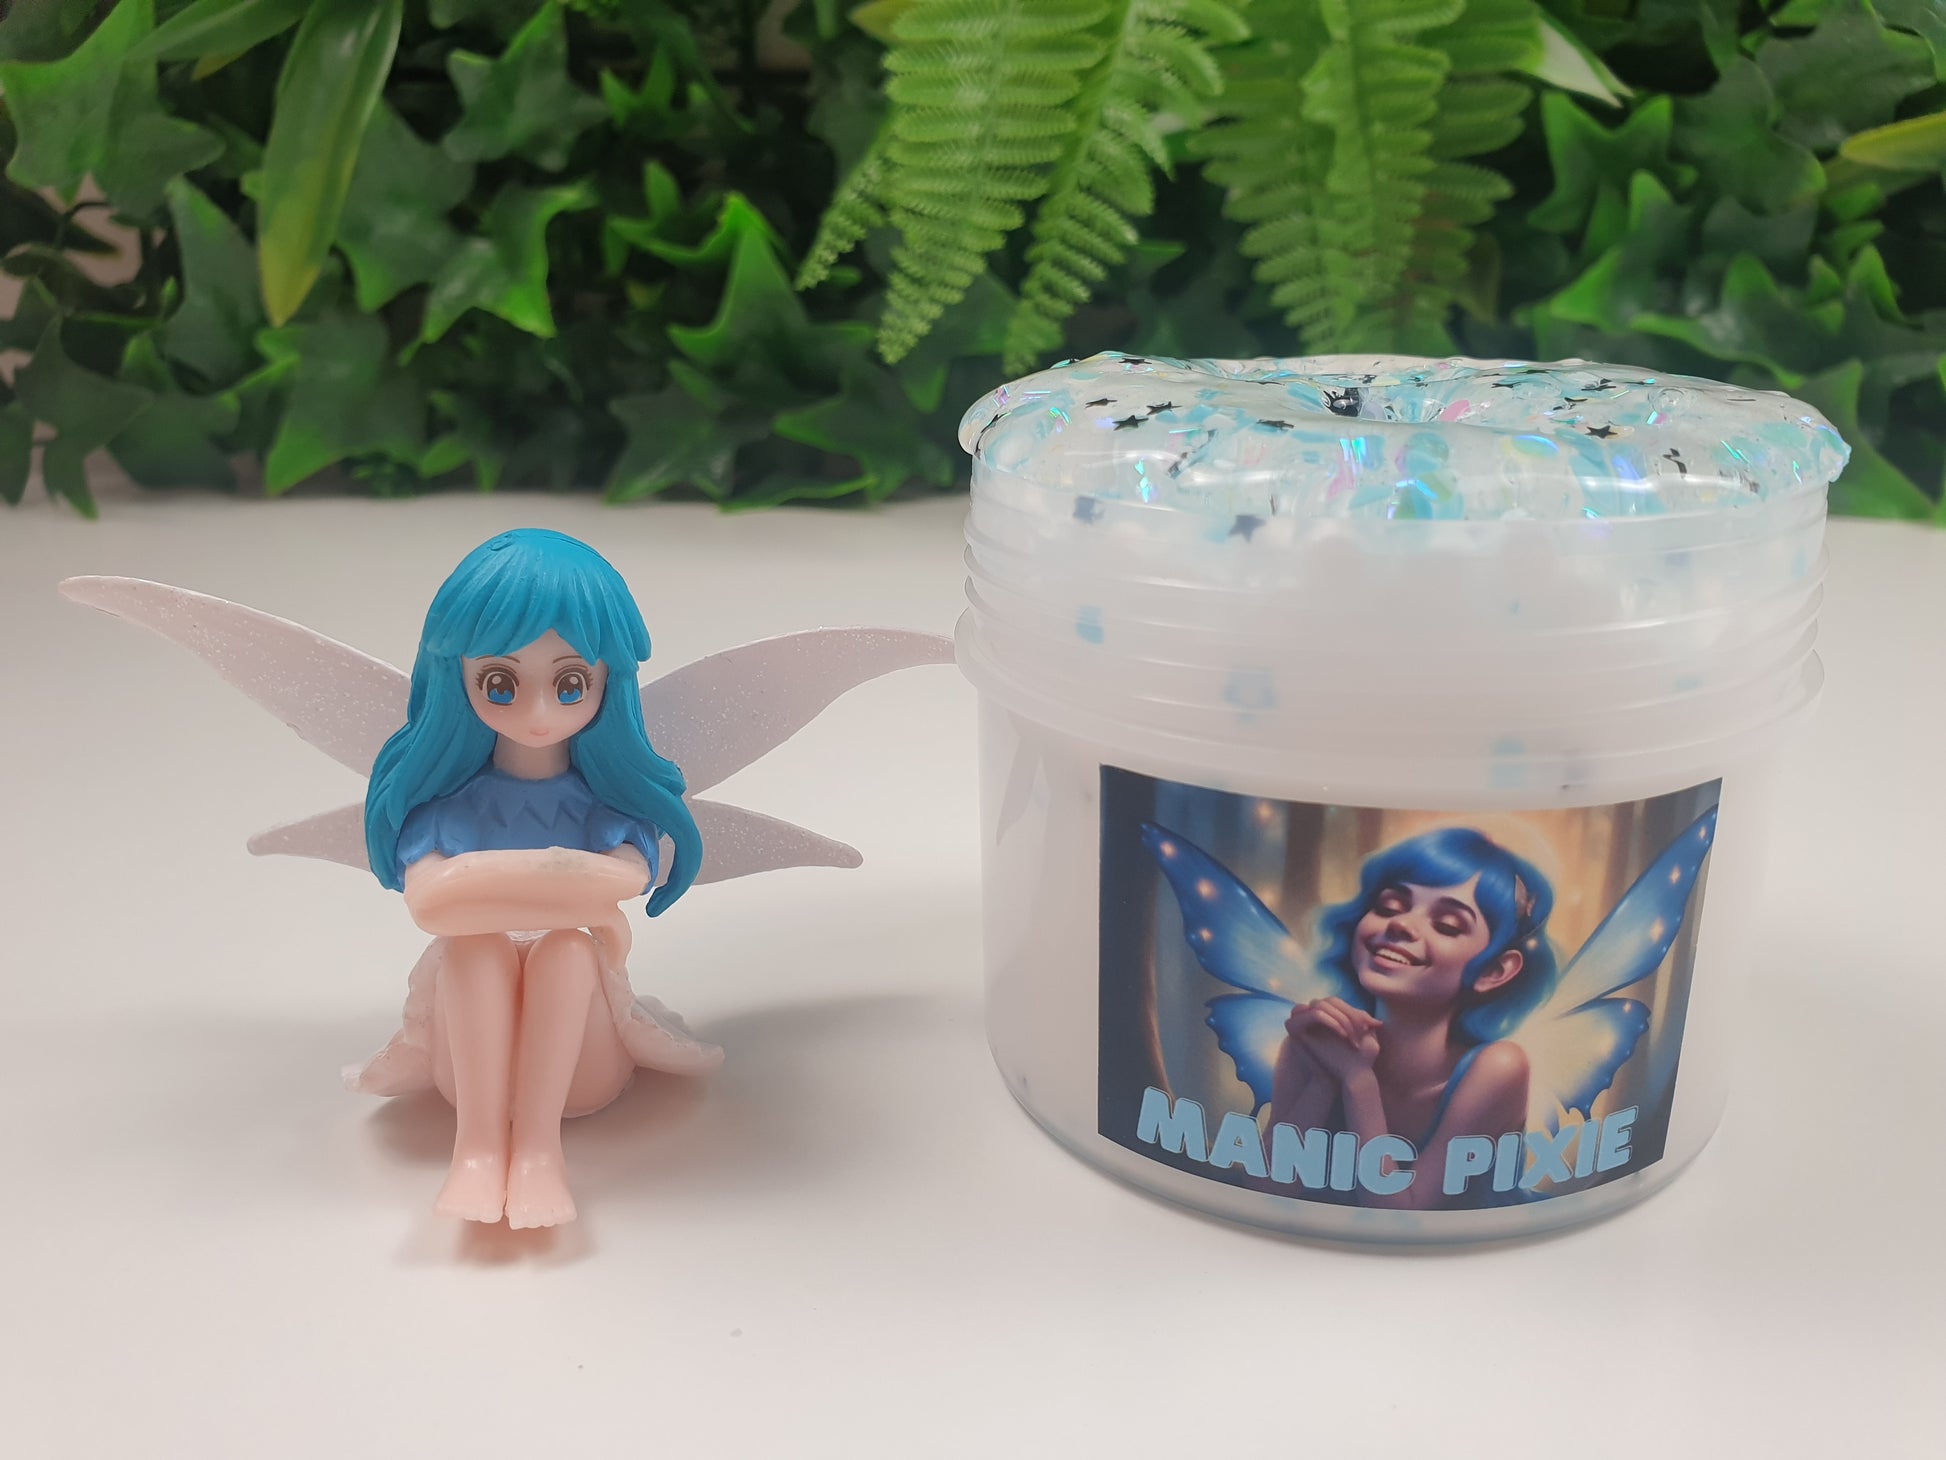 Clear Floam Slime with Glitter mix Clear Topper and Blue Fairy Charm Handmade in Australia 